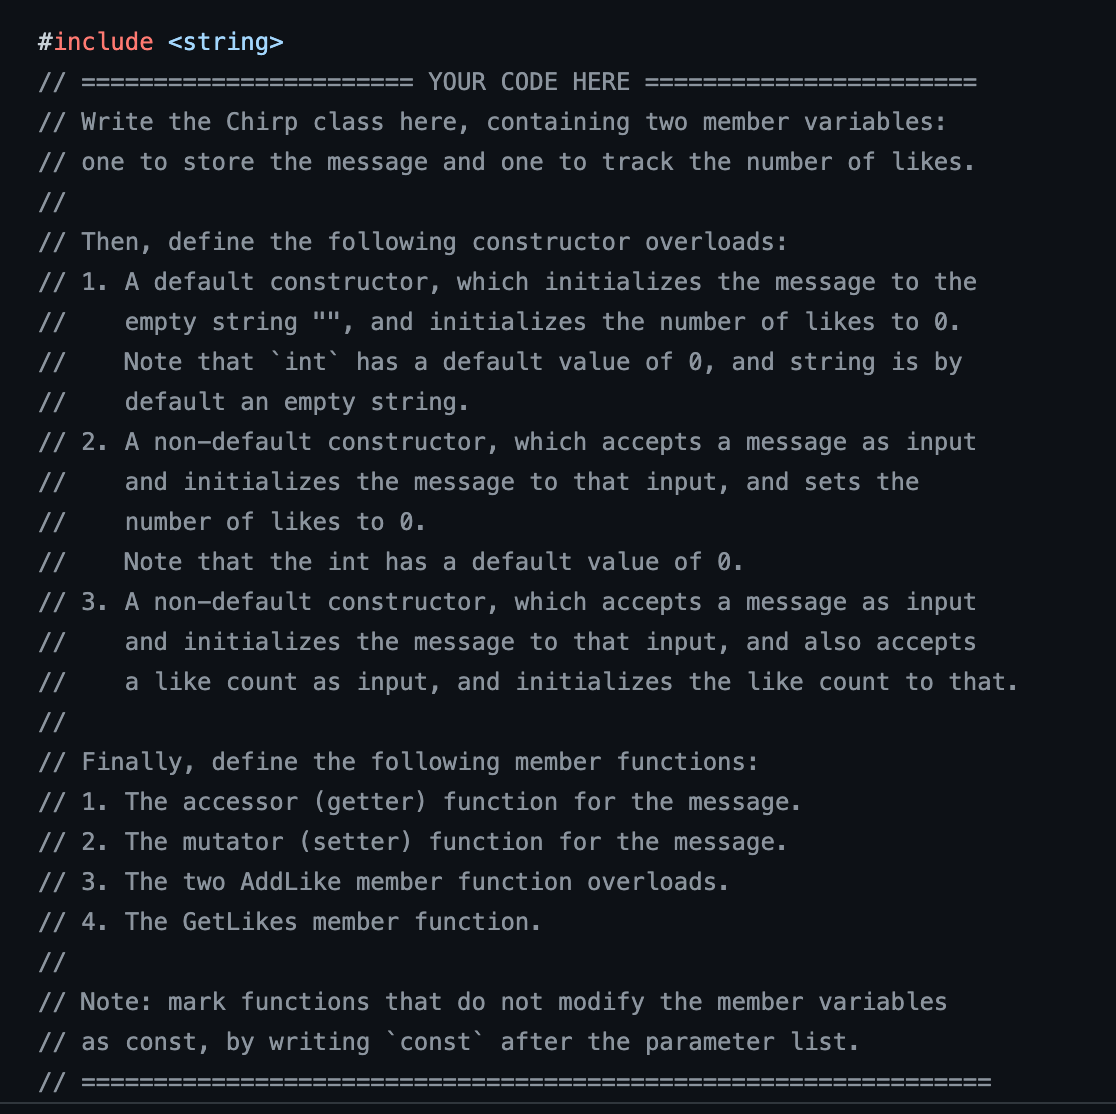 #include <string>
//
YOUR CODE HERE
// Write the Chirp class here, containing two member variables:
// one to store the message and one to track the number of likes.
//
// Then, define the following constructor overloads:
//
// 1. A default constructor, which initializes the message to the
empty string "", and initializes the number of likes to 0.
Note that `int` has a default value of 0, and string is by
default an empty string.
//
//
// 2. A non-default constructor, which accepts a message as input
and initializes the message to that input, and sets the
number of likes to 0.
//
//
Note that the int has a default value of 0.
// 3. A non-default constructor, which accepts a message as input
and initializes the message to that input, and also accepts
a like count as input, and initializes the like count to that.
//
//
// Finally, define the following member functions:
// 1. The accessor (getter) function for the message.
// 2. The mutator (setter) function for the message.
// 3. The two Add Like member function overloads.
// 4. The GetLikes member function.
//
// Note: mark functions that do not modify the member variables
// as const, by writing `const` after the parameter list.
//